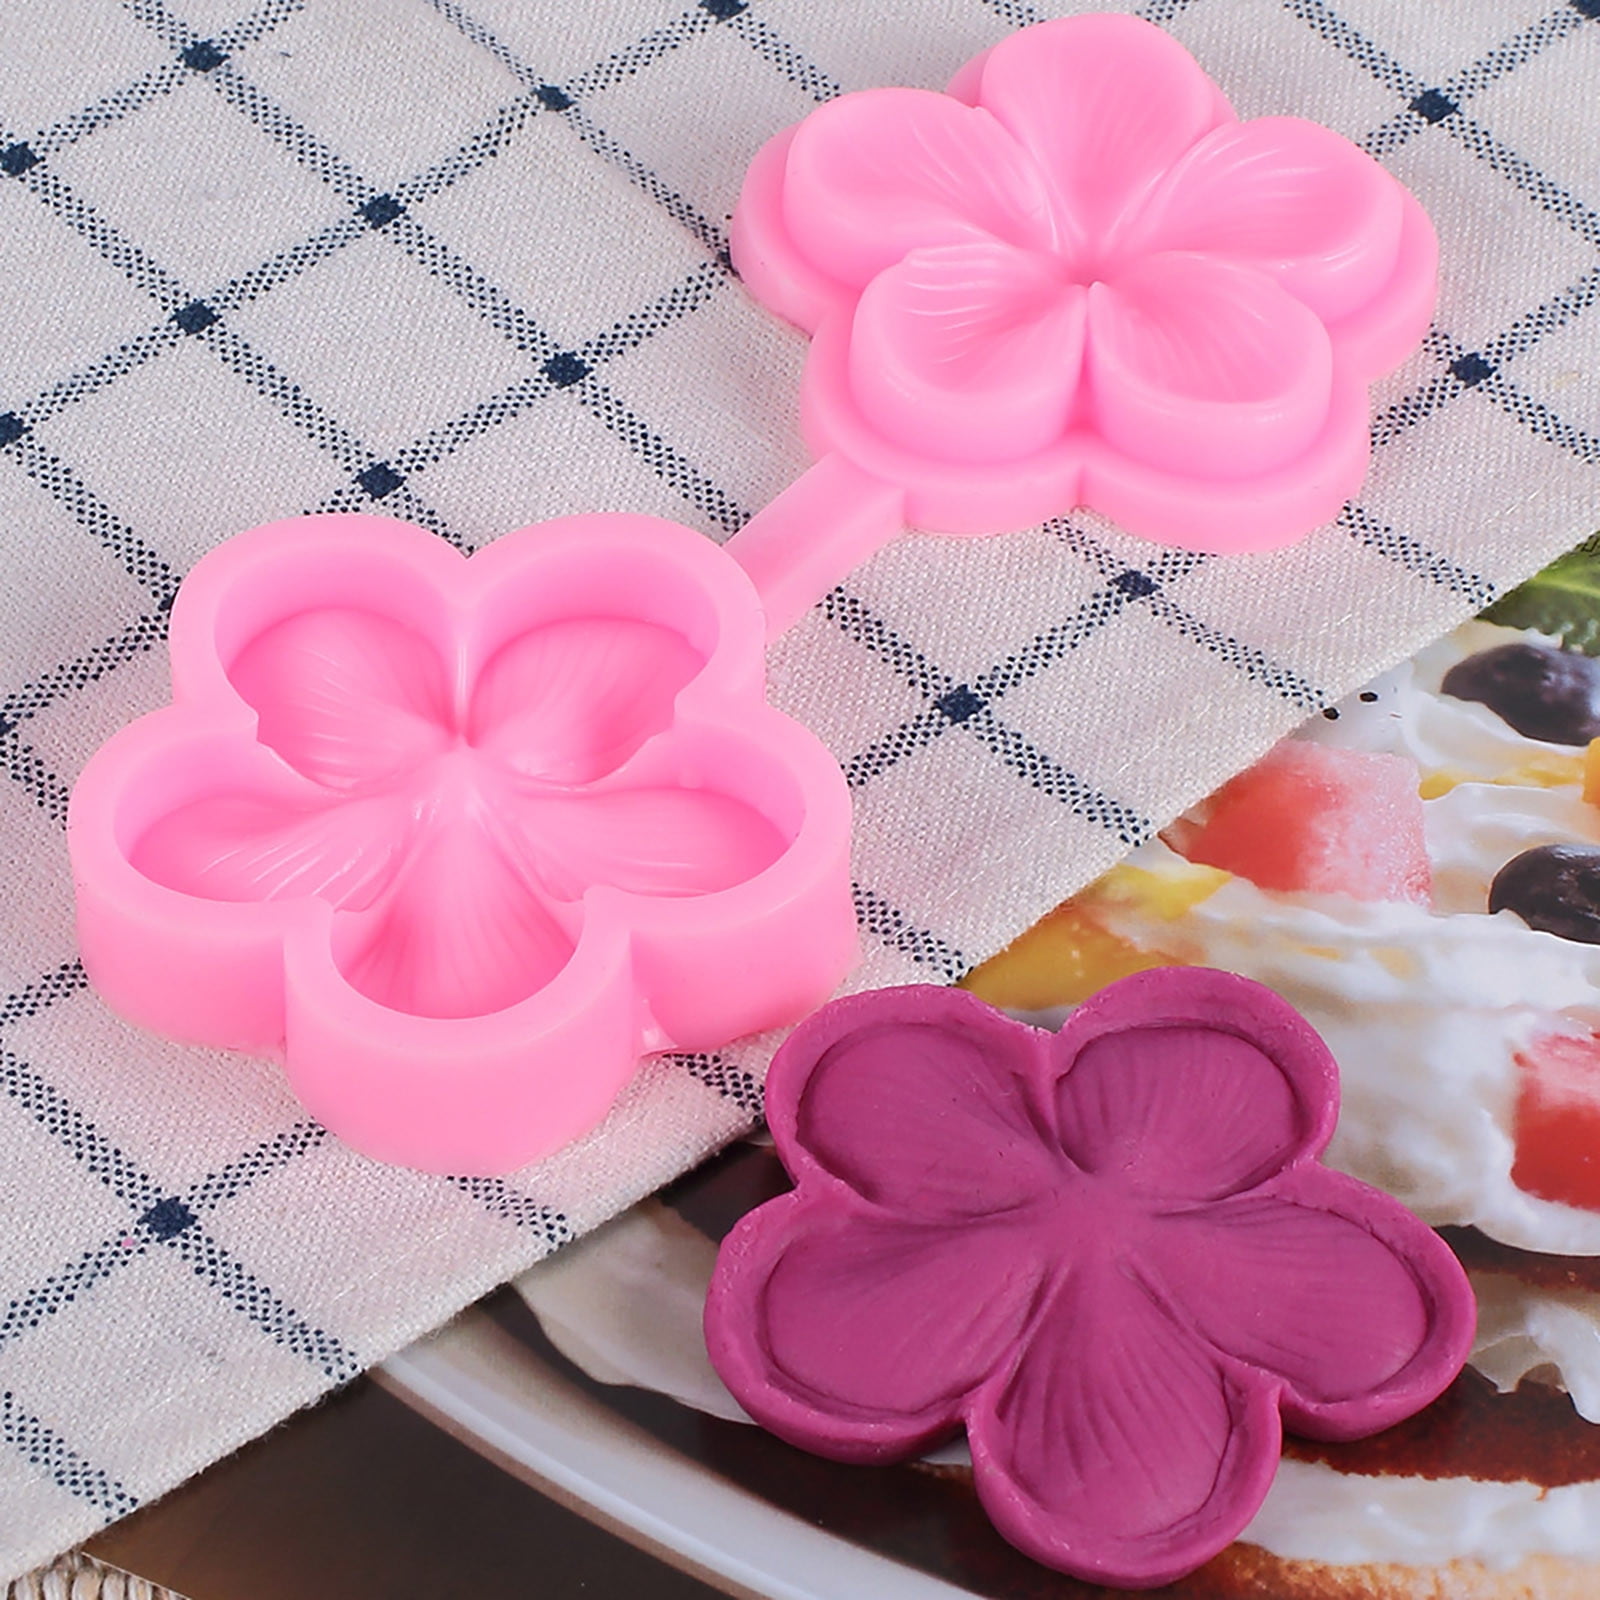 3D Leaves Silicone Baking Mould Accessories Fondant Cake Decor DIY Tools LE